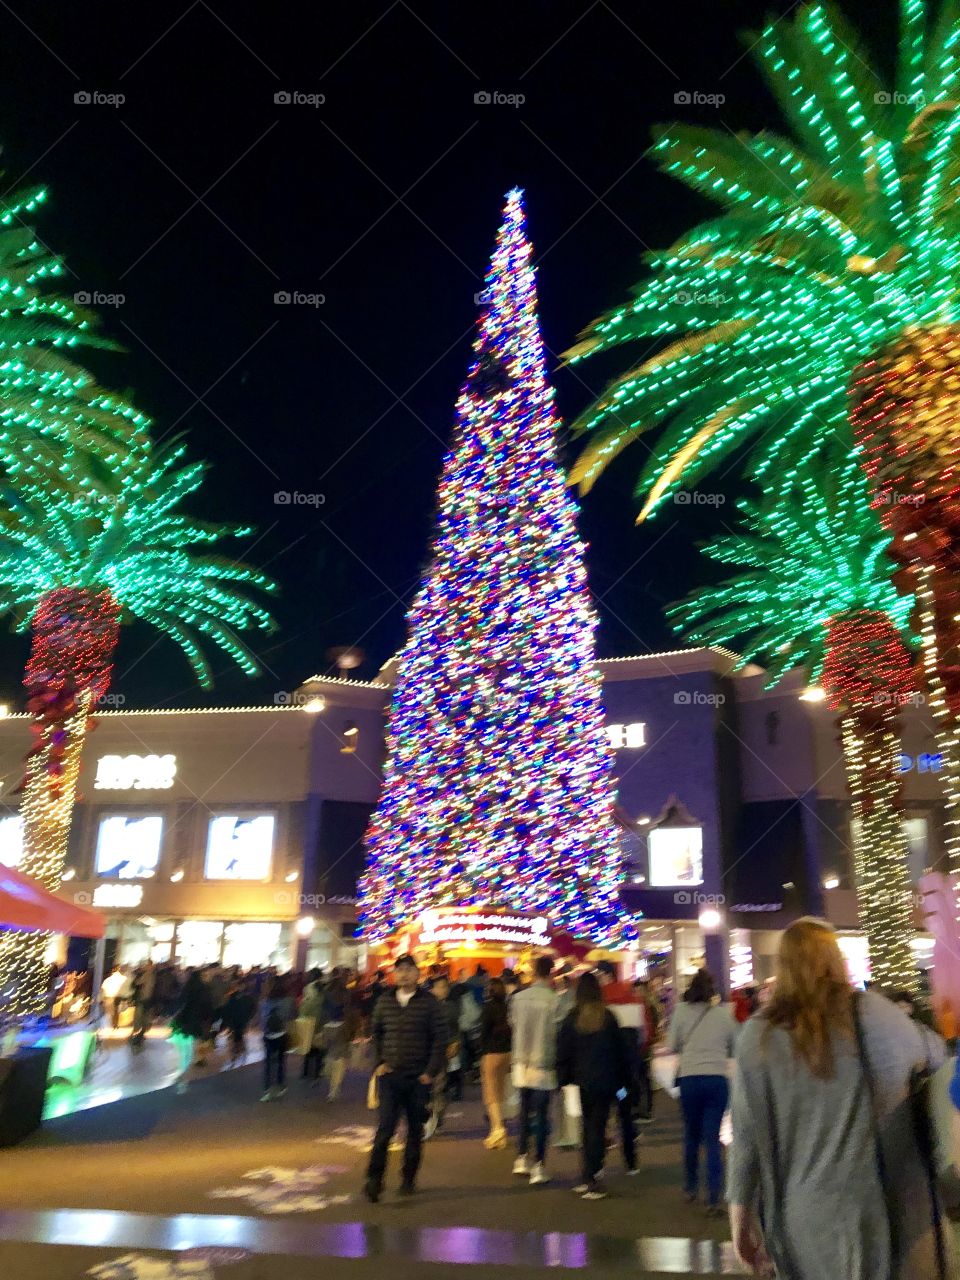 World’s largest Christmas tree with lighted palm trees.